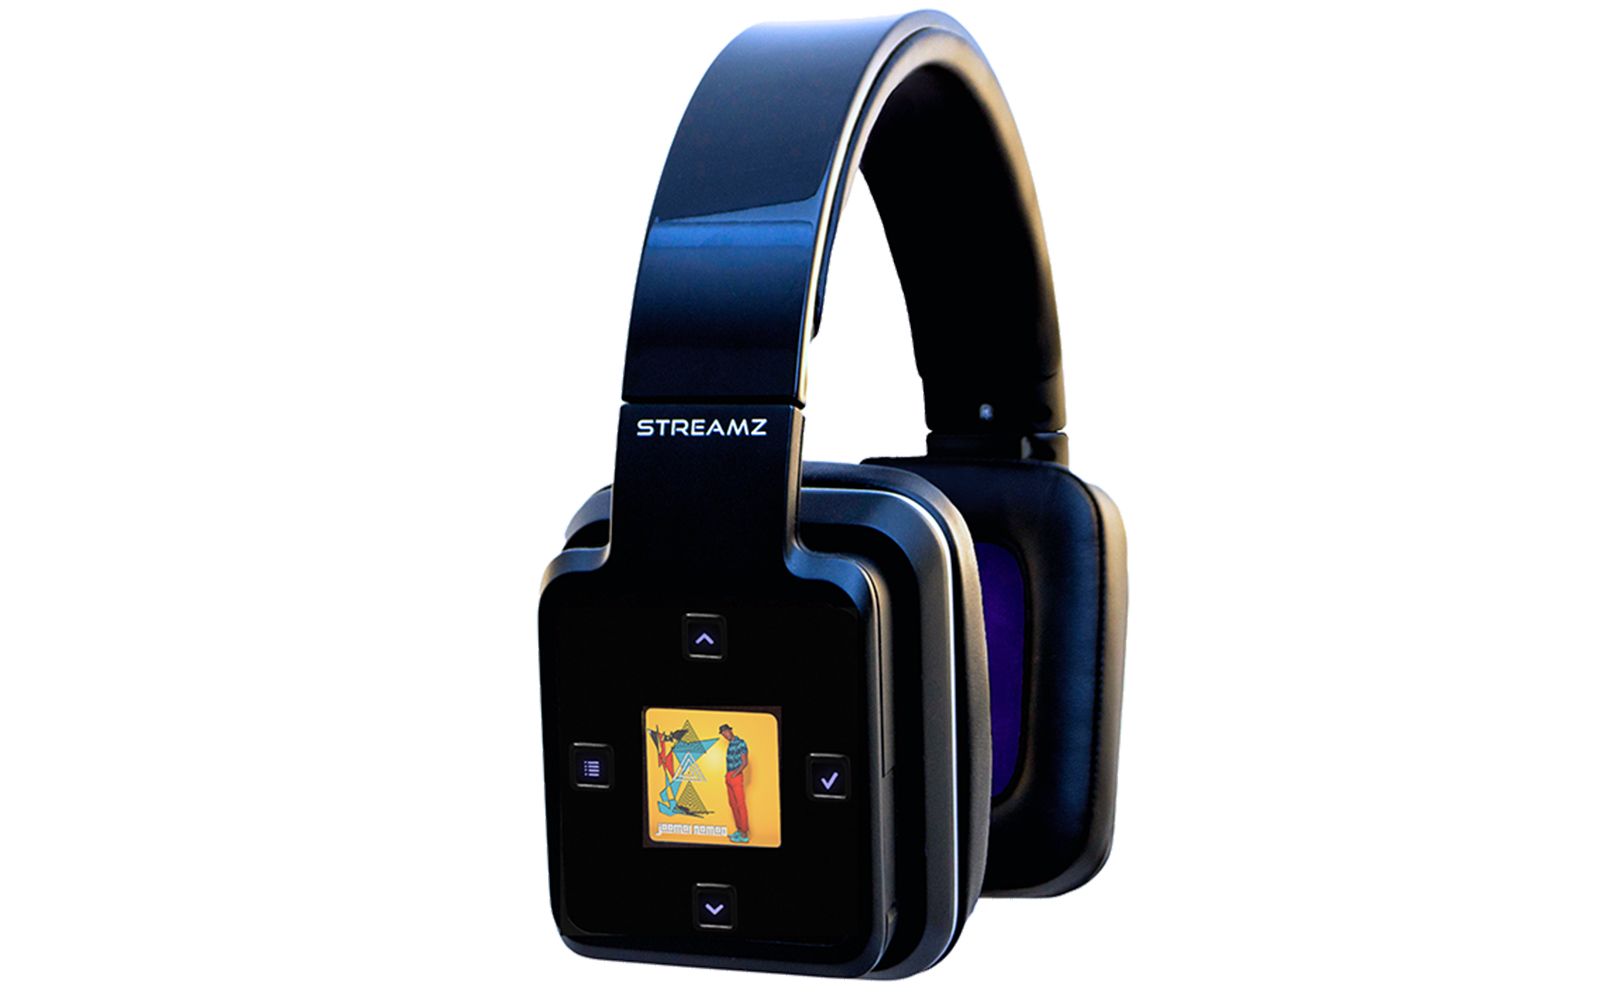 streamz smart headphones run android to play high def audio wirelessly no phone needed image 1